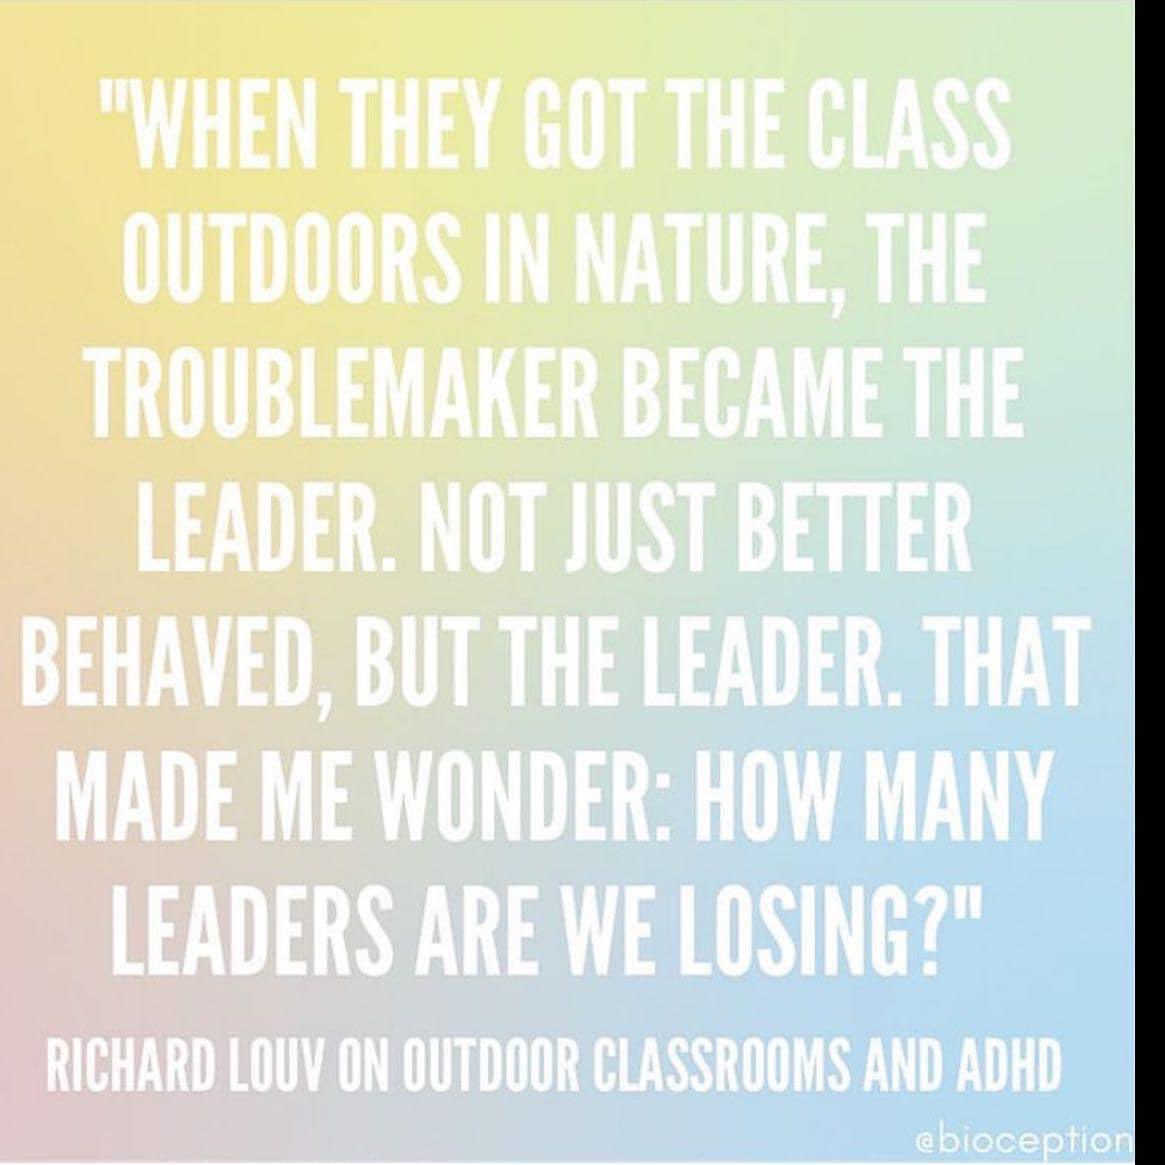 Quote by @RichLouv 
#outdoorlearning #natureplay #forestschool